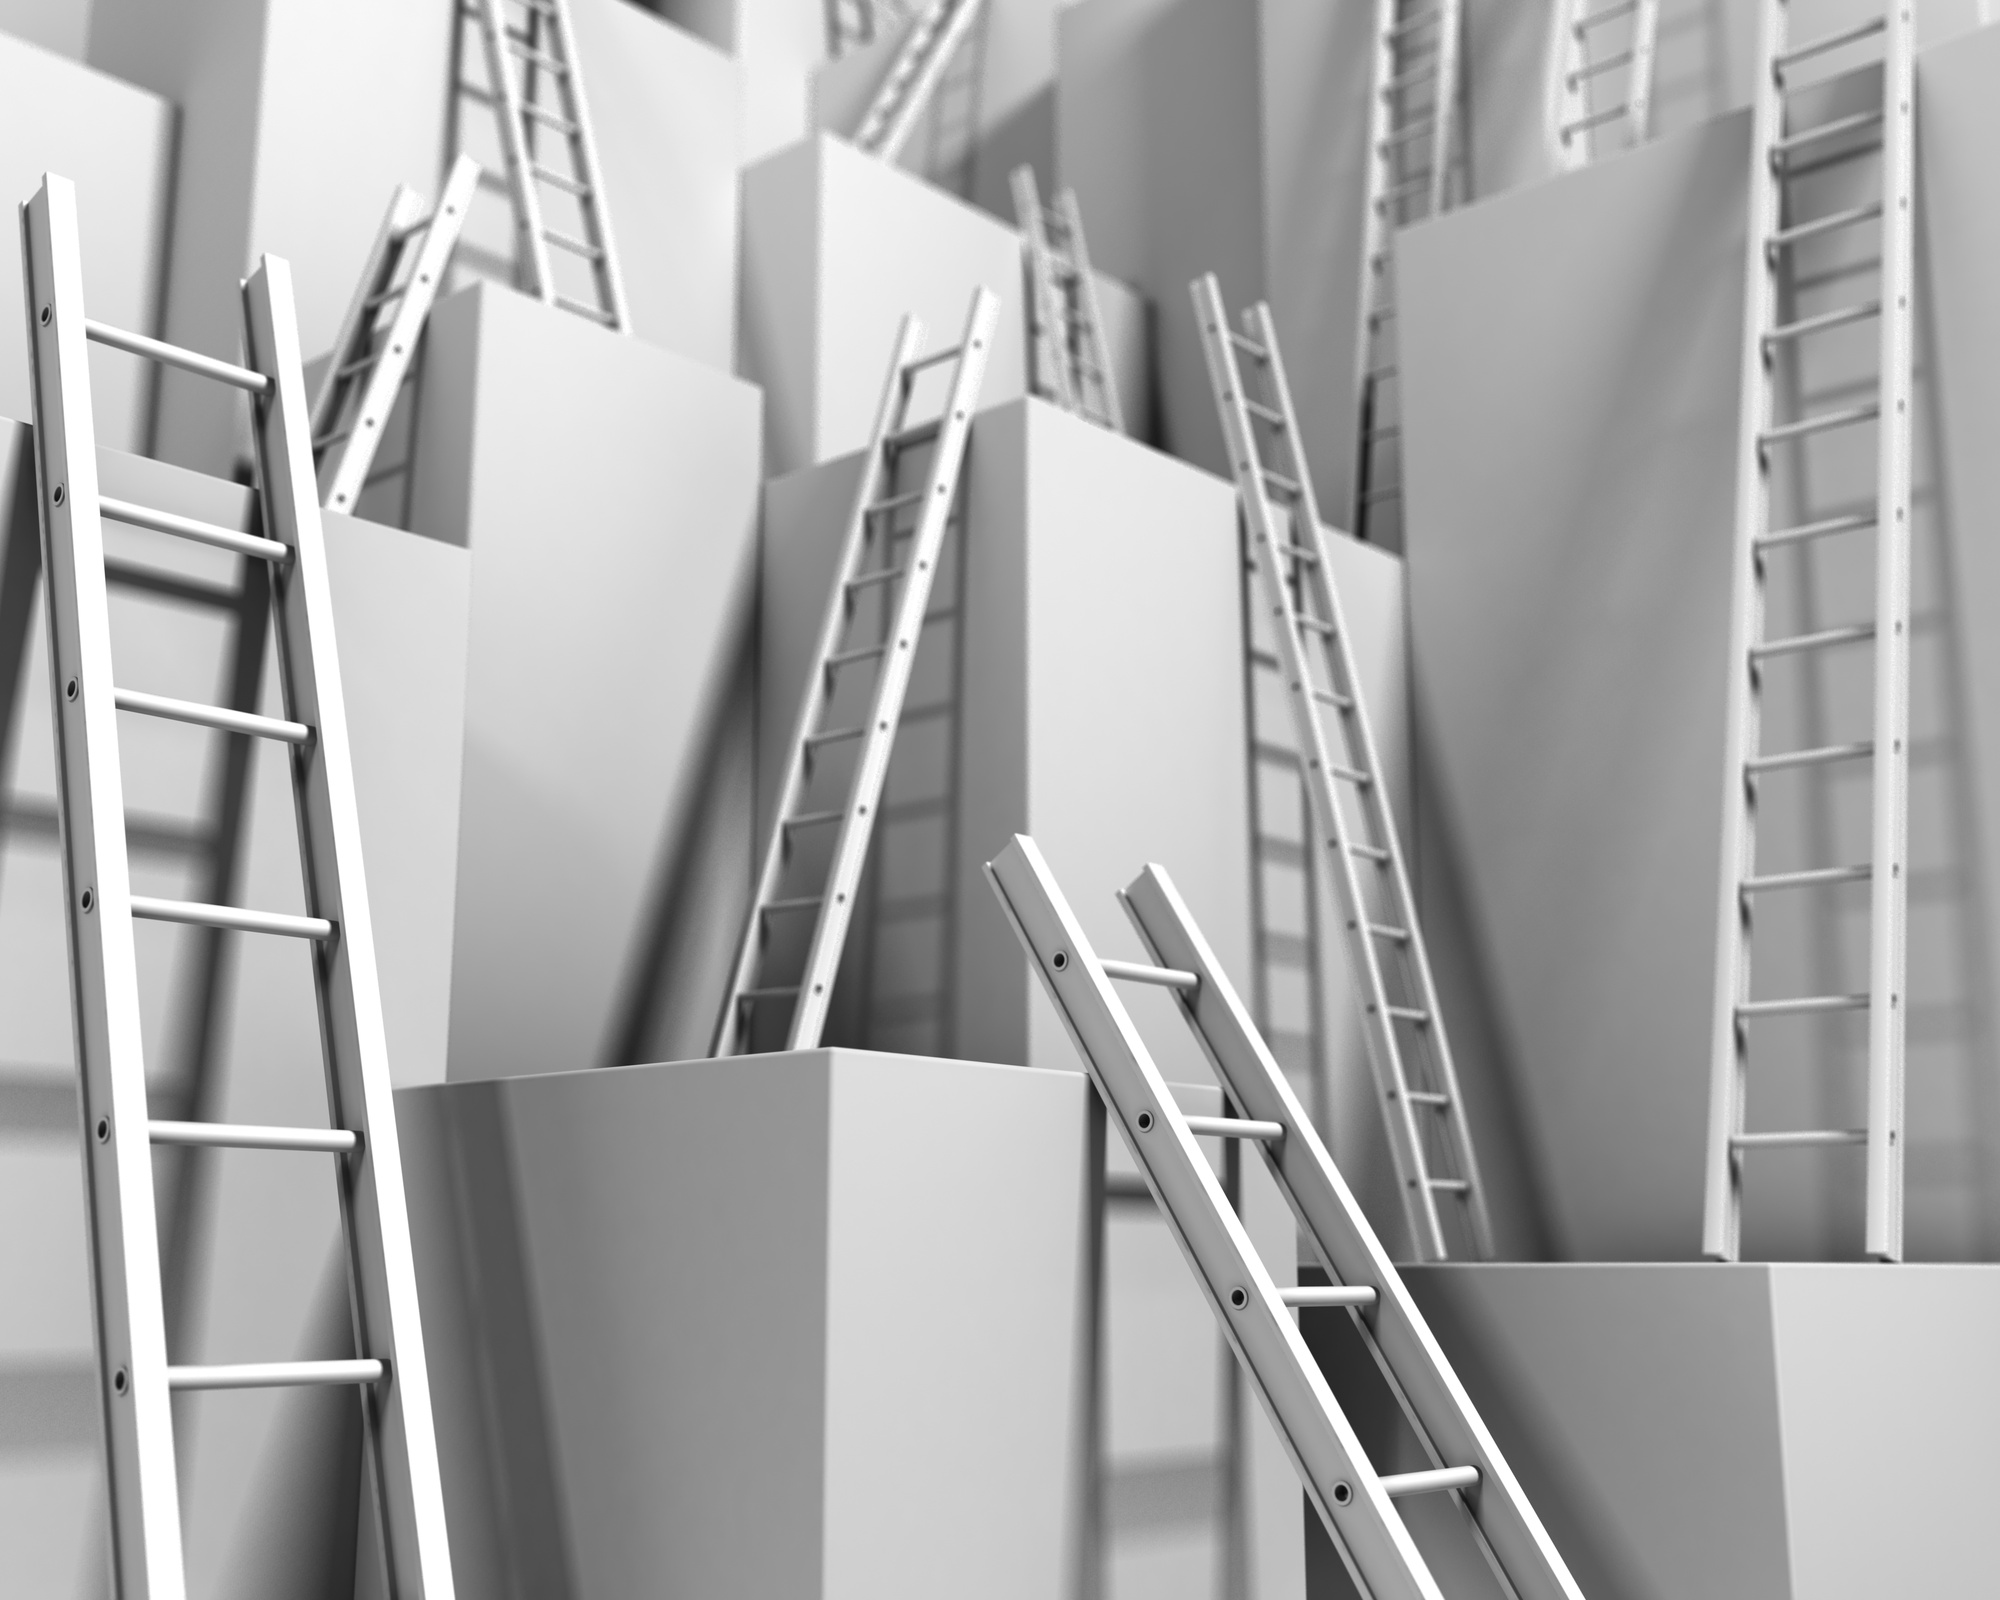 Abstract of various ladders suggesting corporate ladder